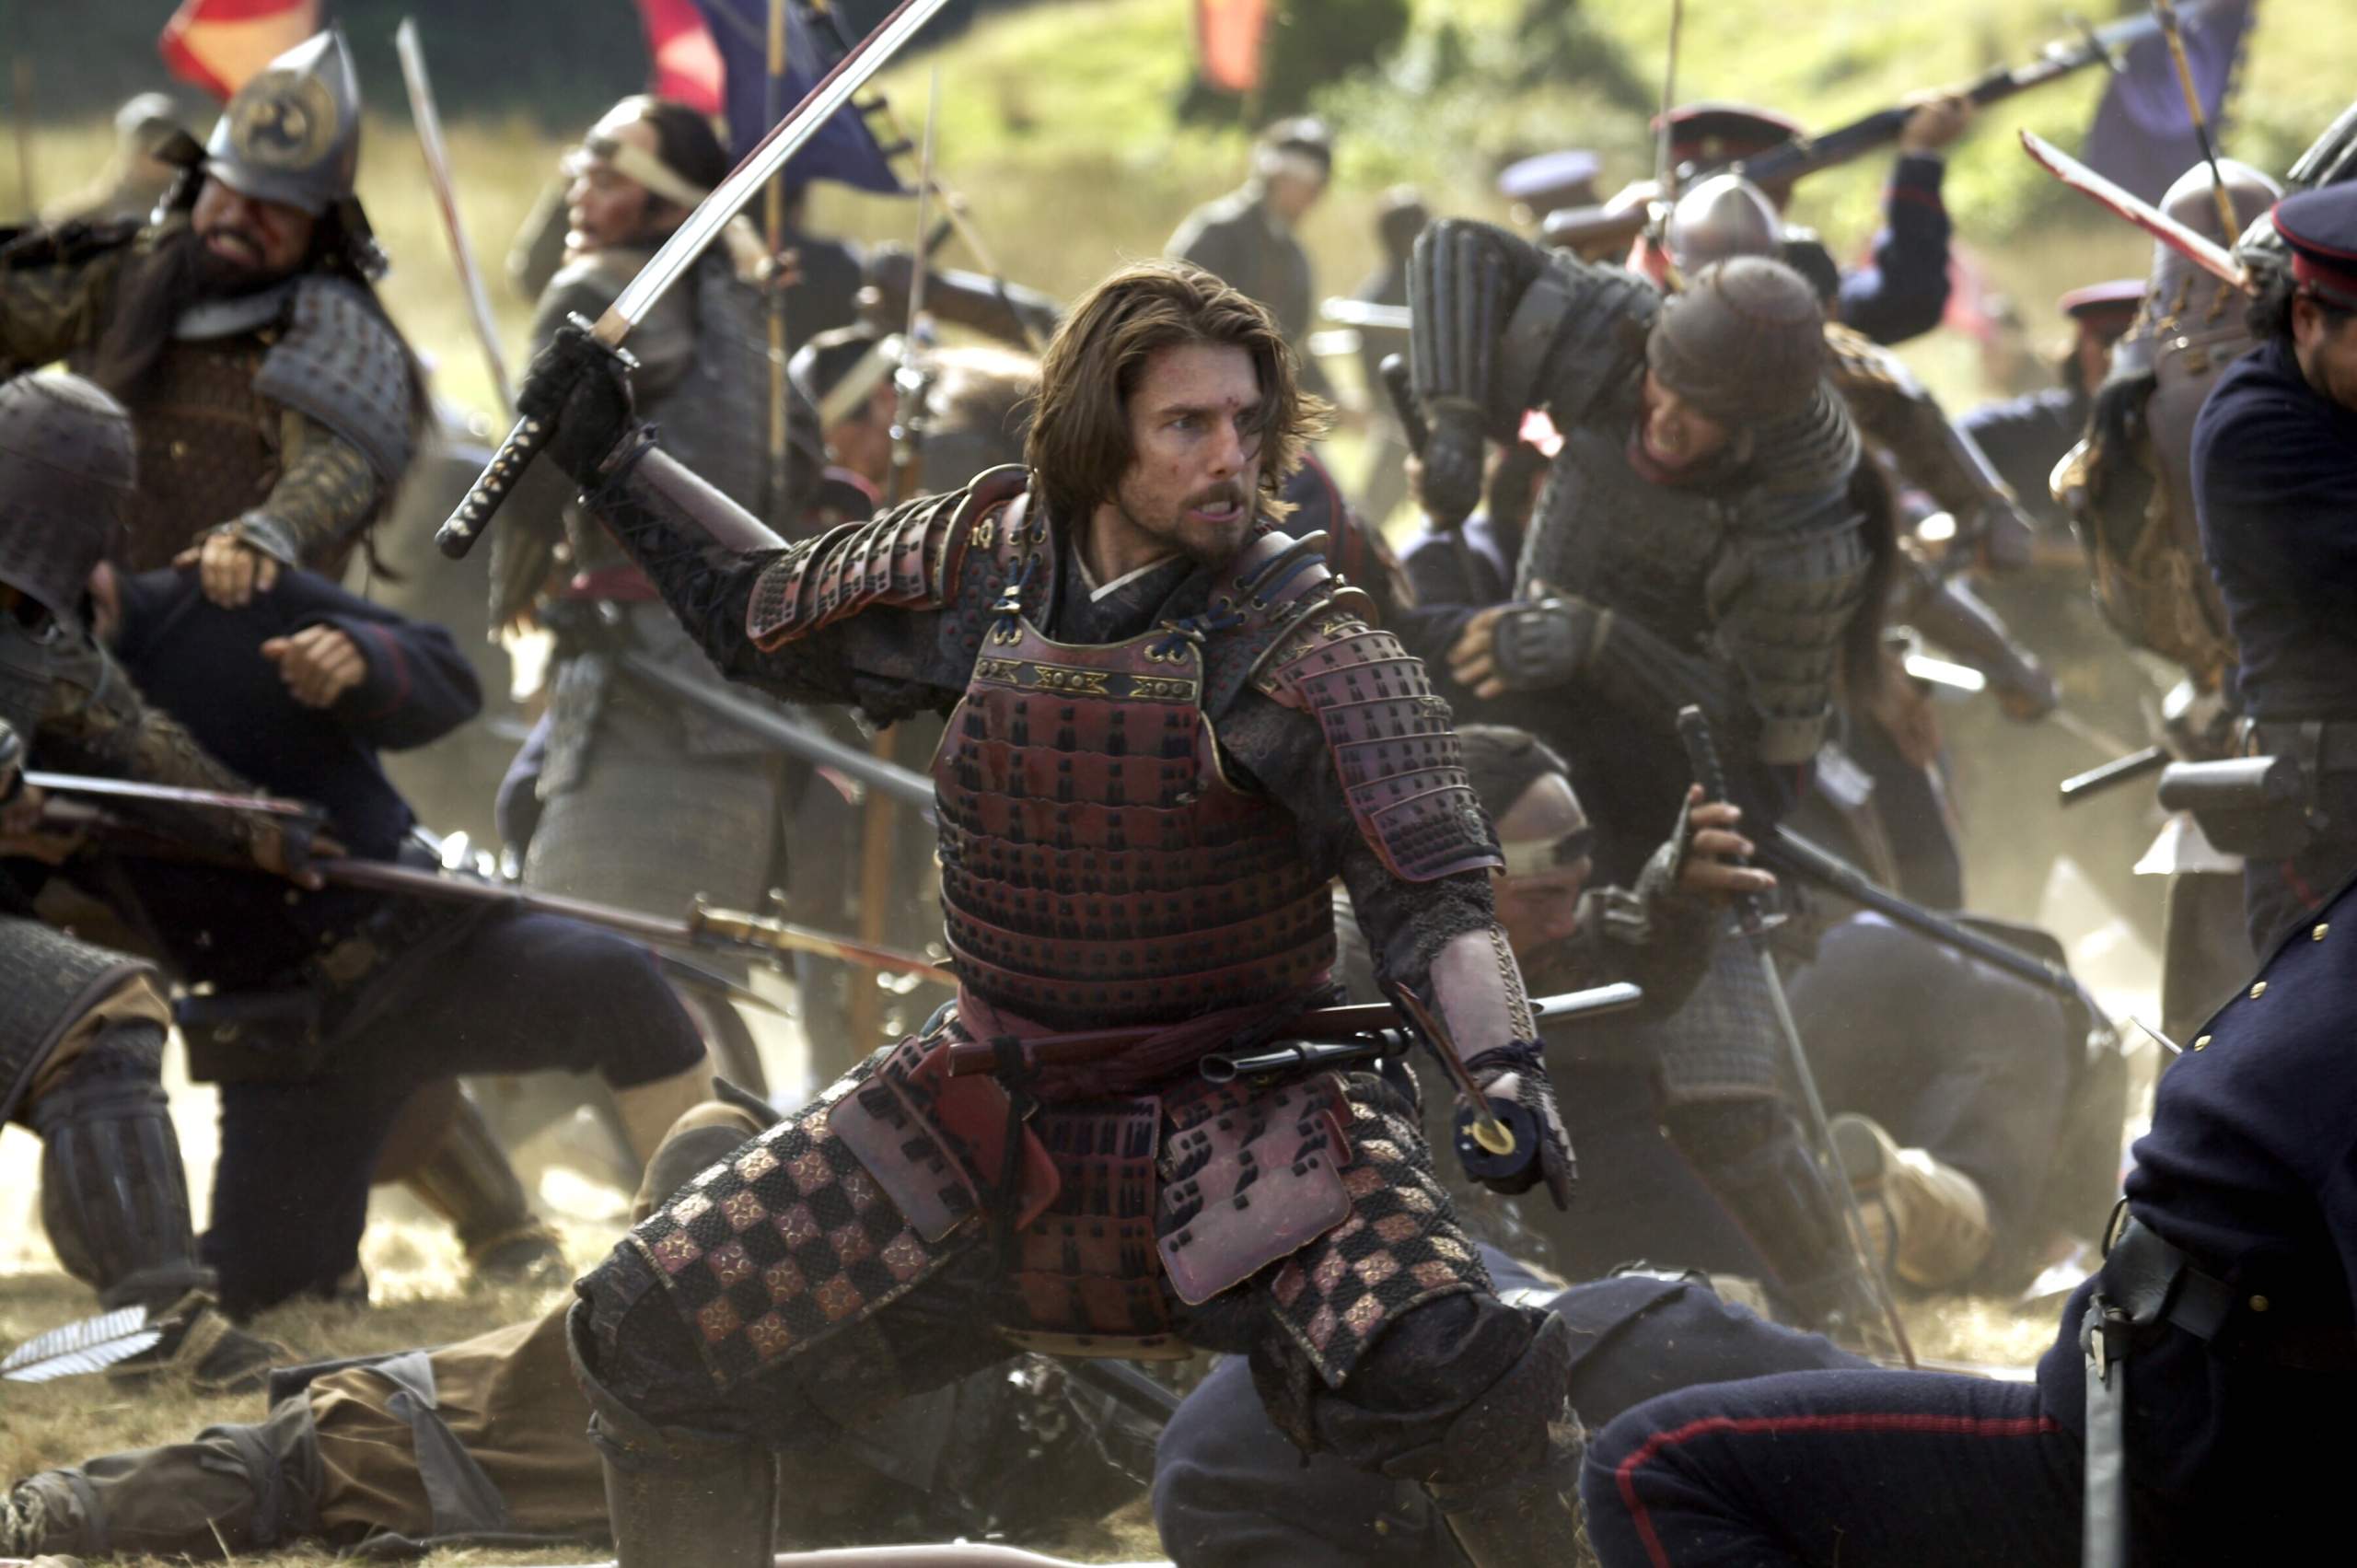 There aren’t many new ideas in <em>The Last Samurai,</em> but it is still a solid period epic that explores the tension between tradition and modernity. The film seems to take great care in trying to portray late 1800s Japanese culture as accurately as it can, and it manages to mostly avoid falling into that western romanticized trap. The cast is solid. Credit to Ken Watanabe who not only turns in a stellar performance but also comes off as an equal to Cruise. None of this works if Watanabe gets overshadowed by the sheer star power of his co-star.